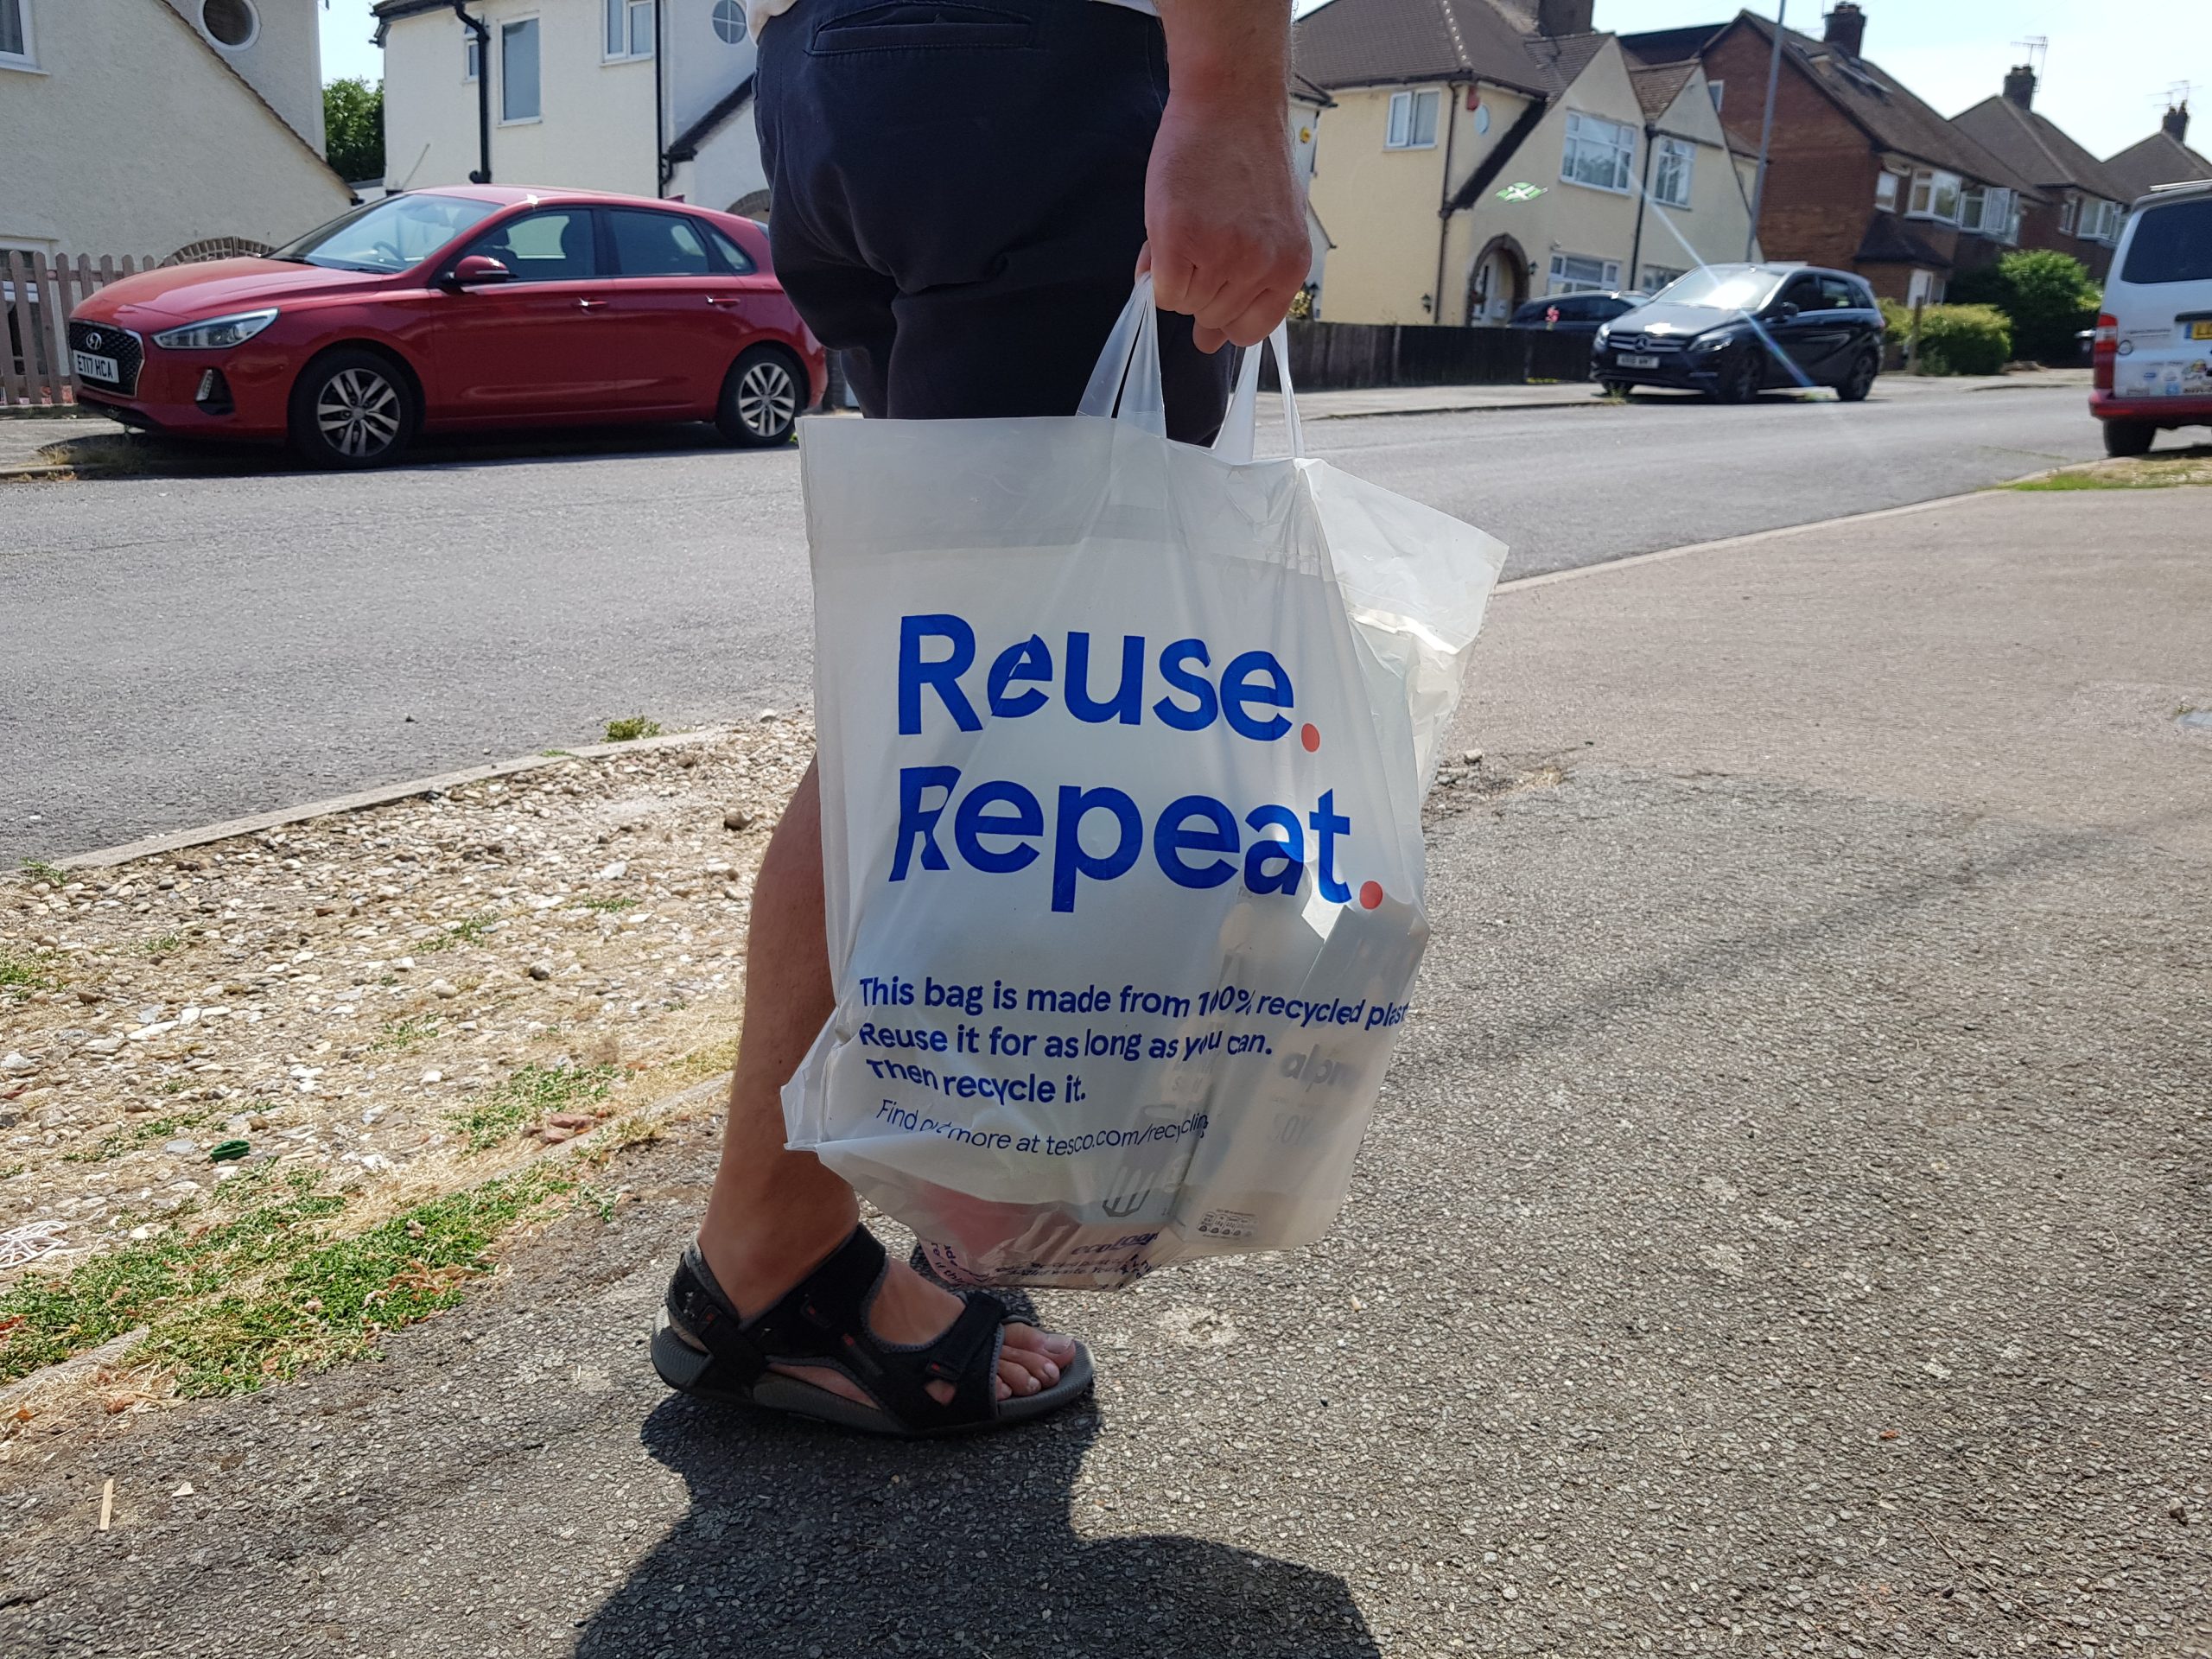 Tesco to sell carrier bags made from plastic waste